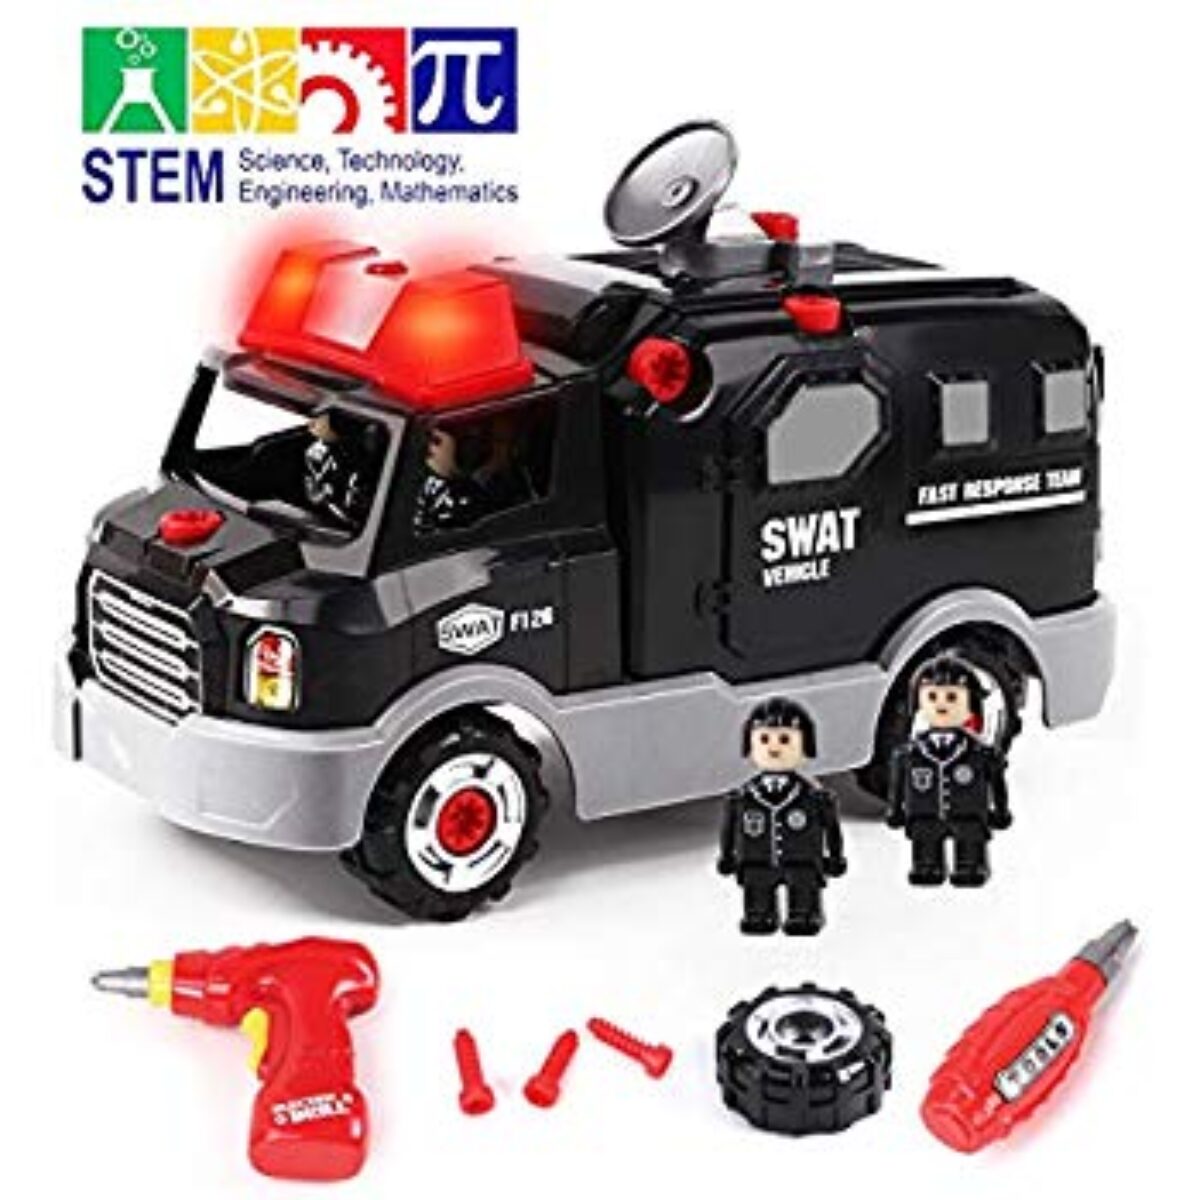 Push and Go Pull Back Diecast Emergency Transport Vehicle Car Number 1 in Gadgets Police Car Toy Friction Powered Rescue Vehicle with Lights and Siren Sounds for Boys Toddlers and Kids